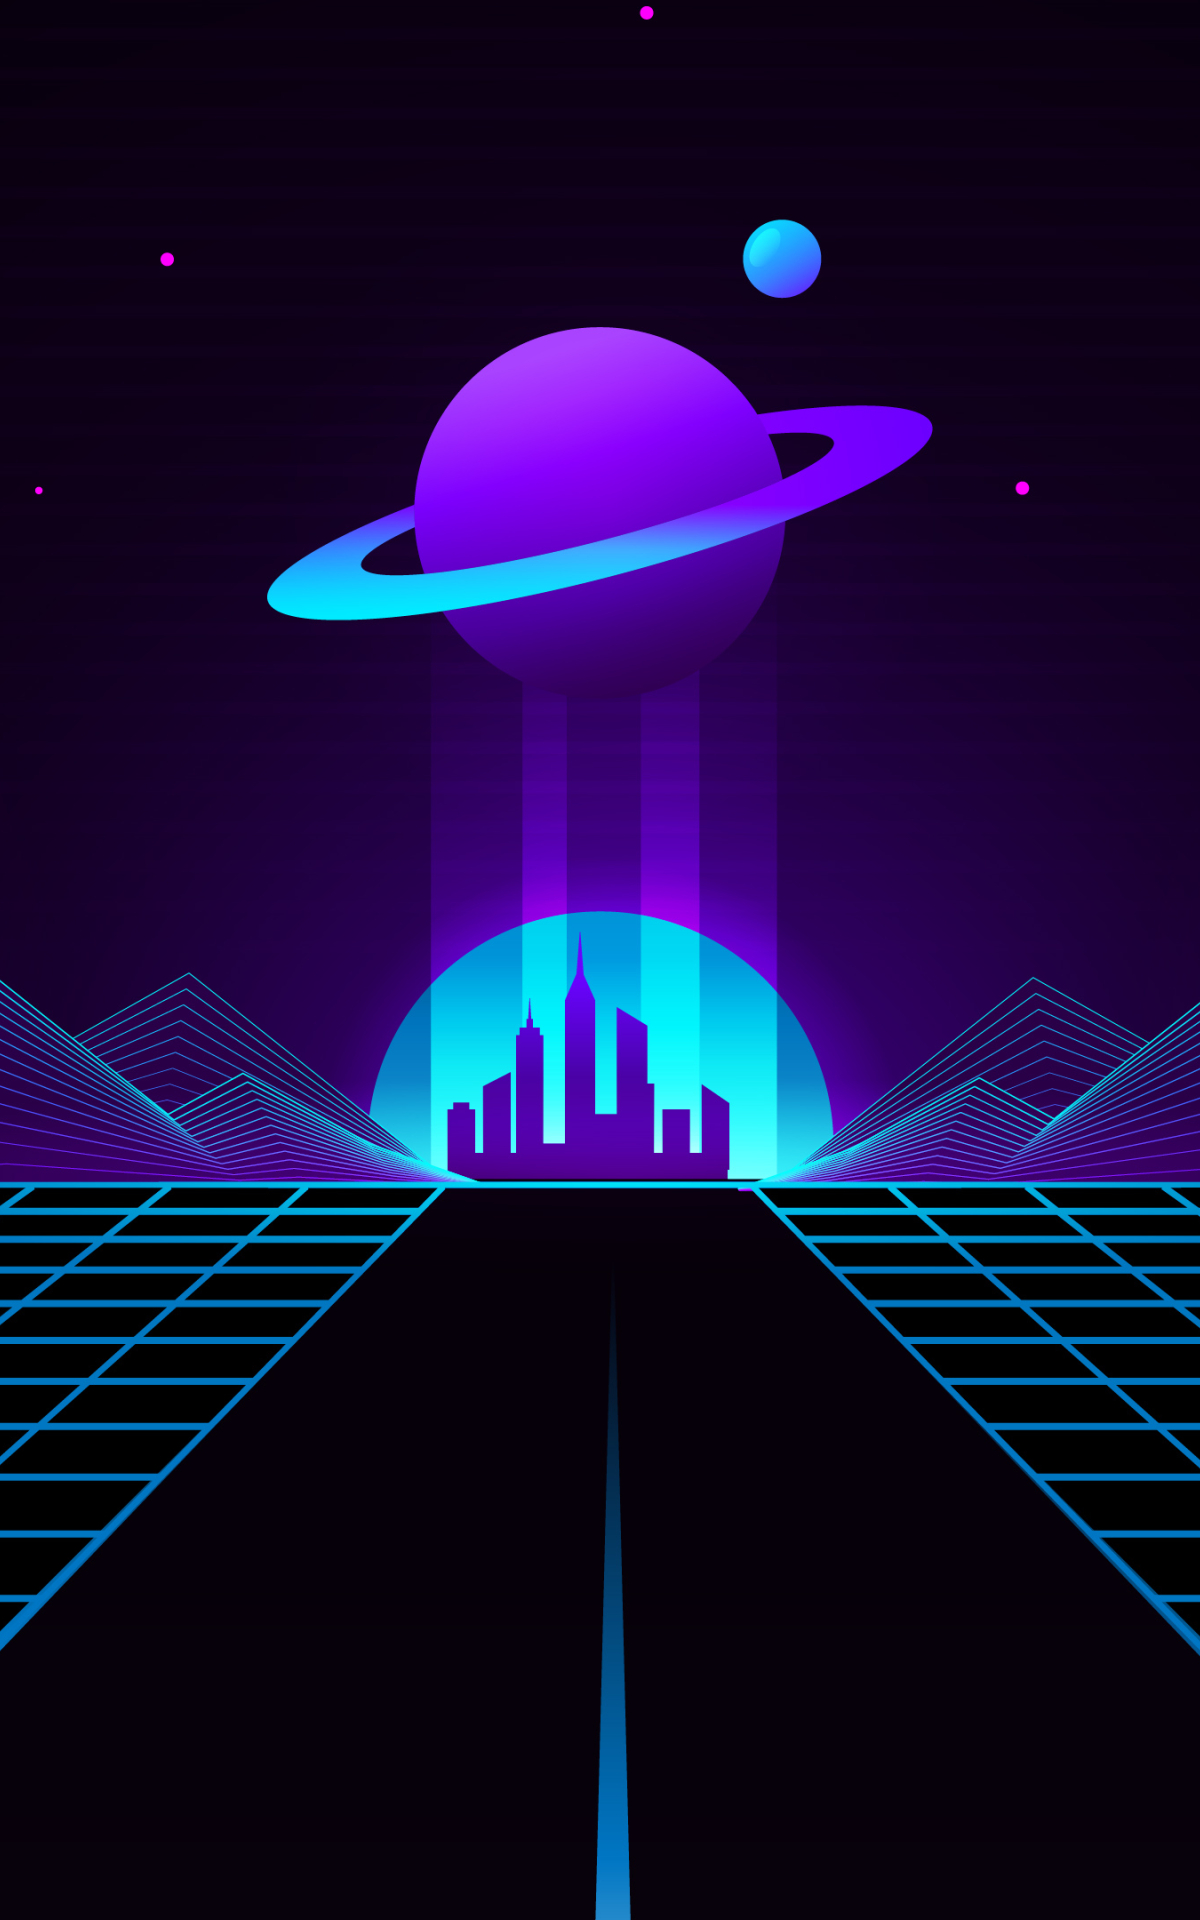 10x19 Synthwave Planet Retro Wave 10x19 Resolution Wallpaper Hd Artist 4k Wallpapers Images Photos And Background Wallpapers Den